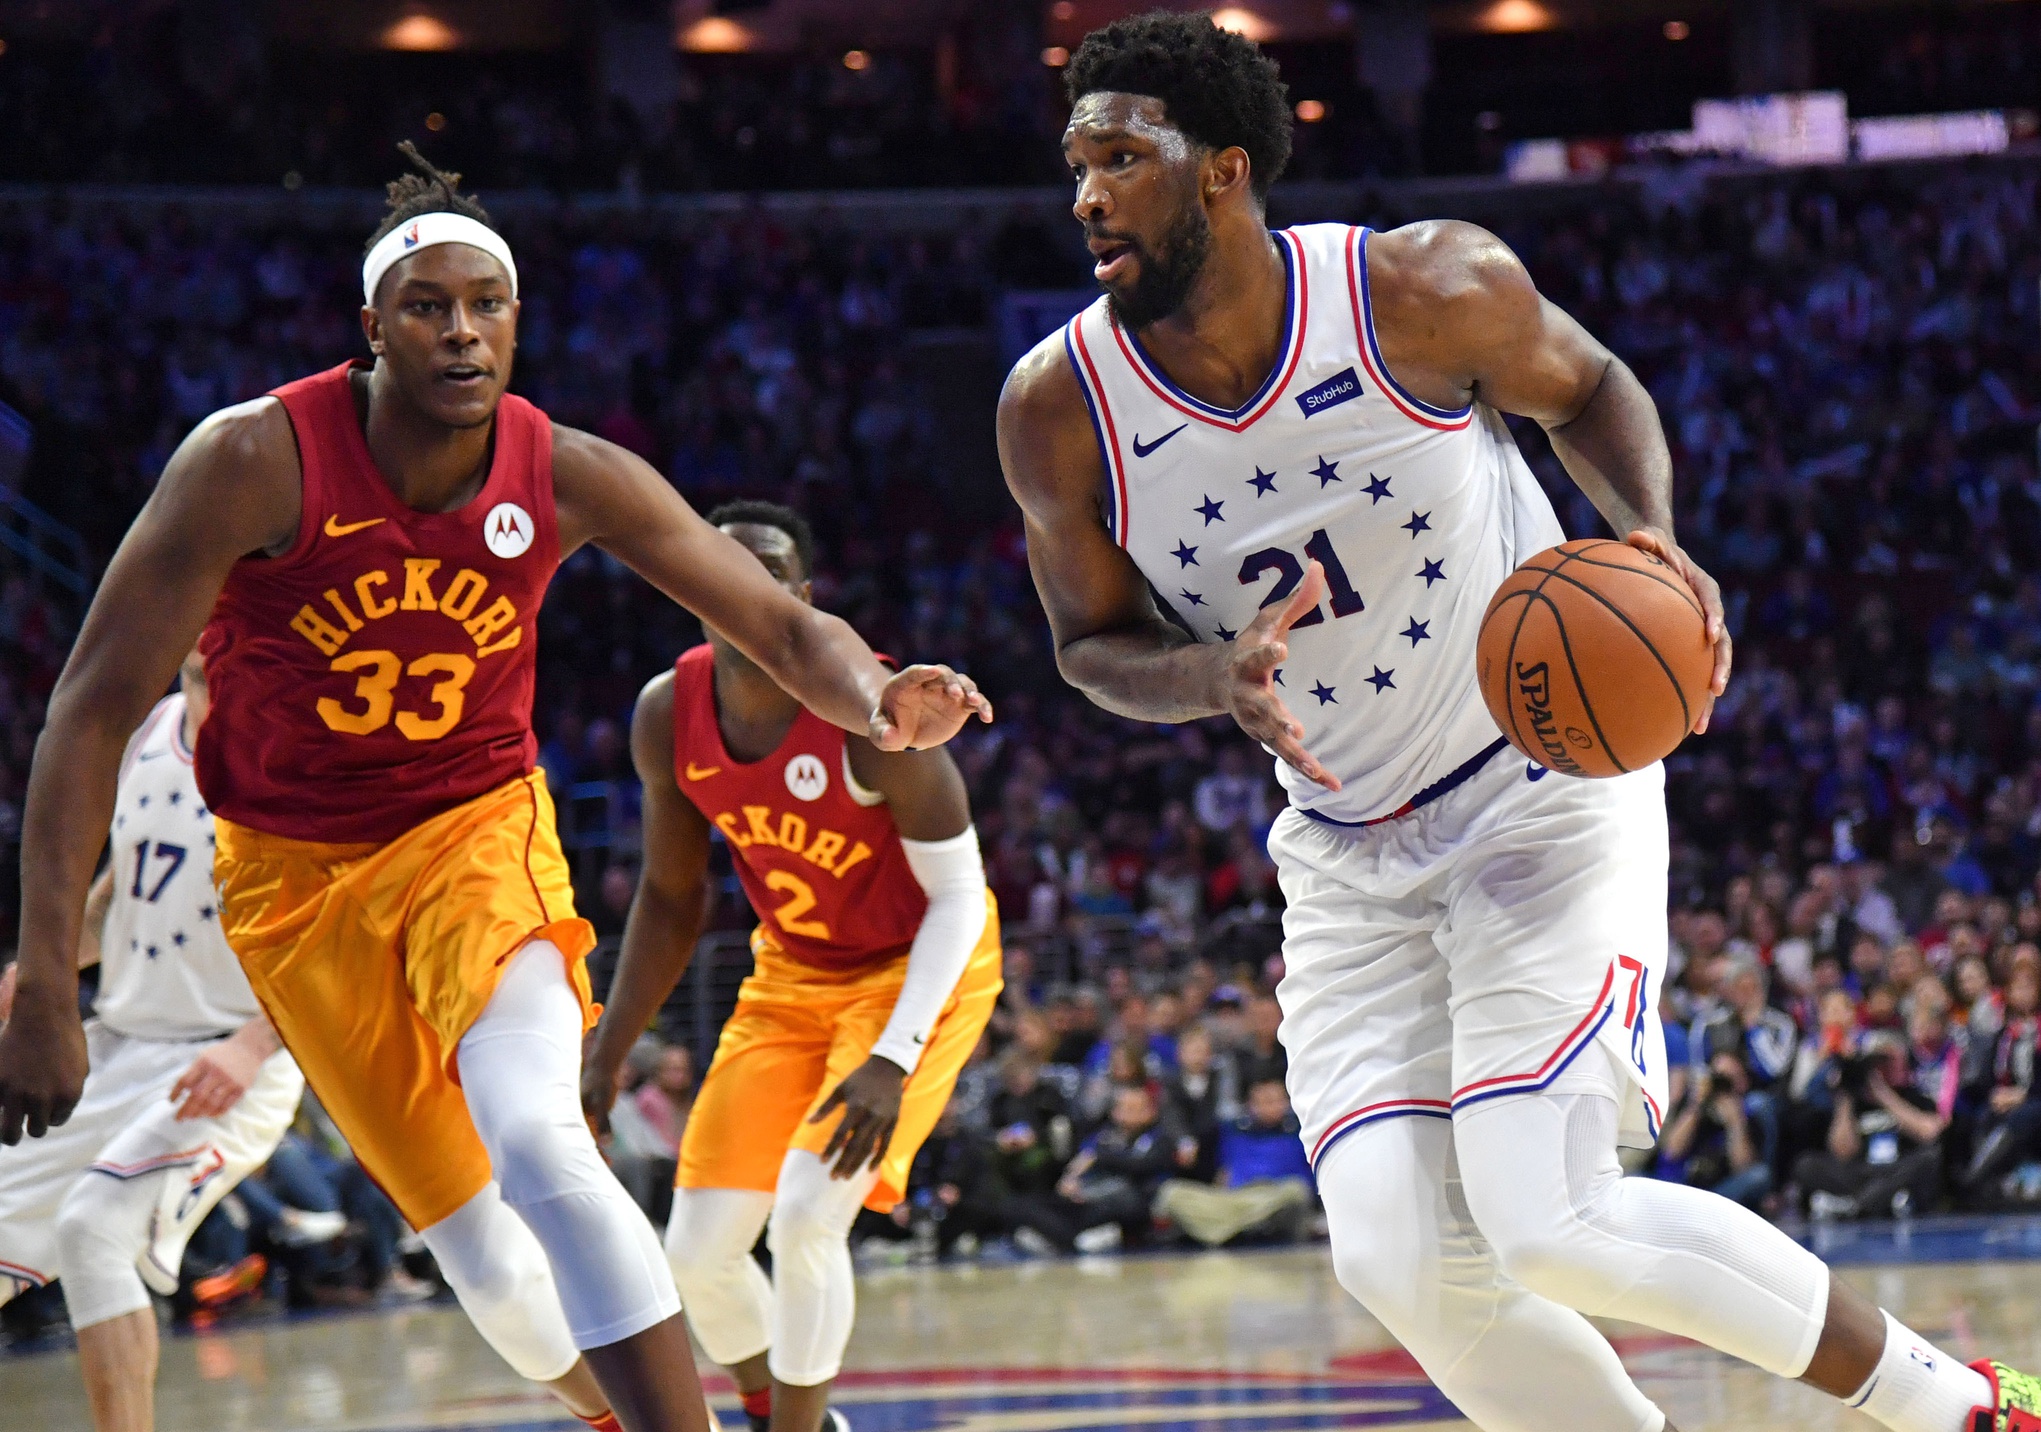 Brett Brown and Elton Brand Offer Different Statements on Joel Embiid’s Health